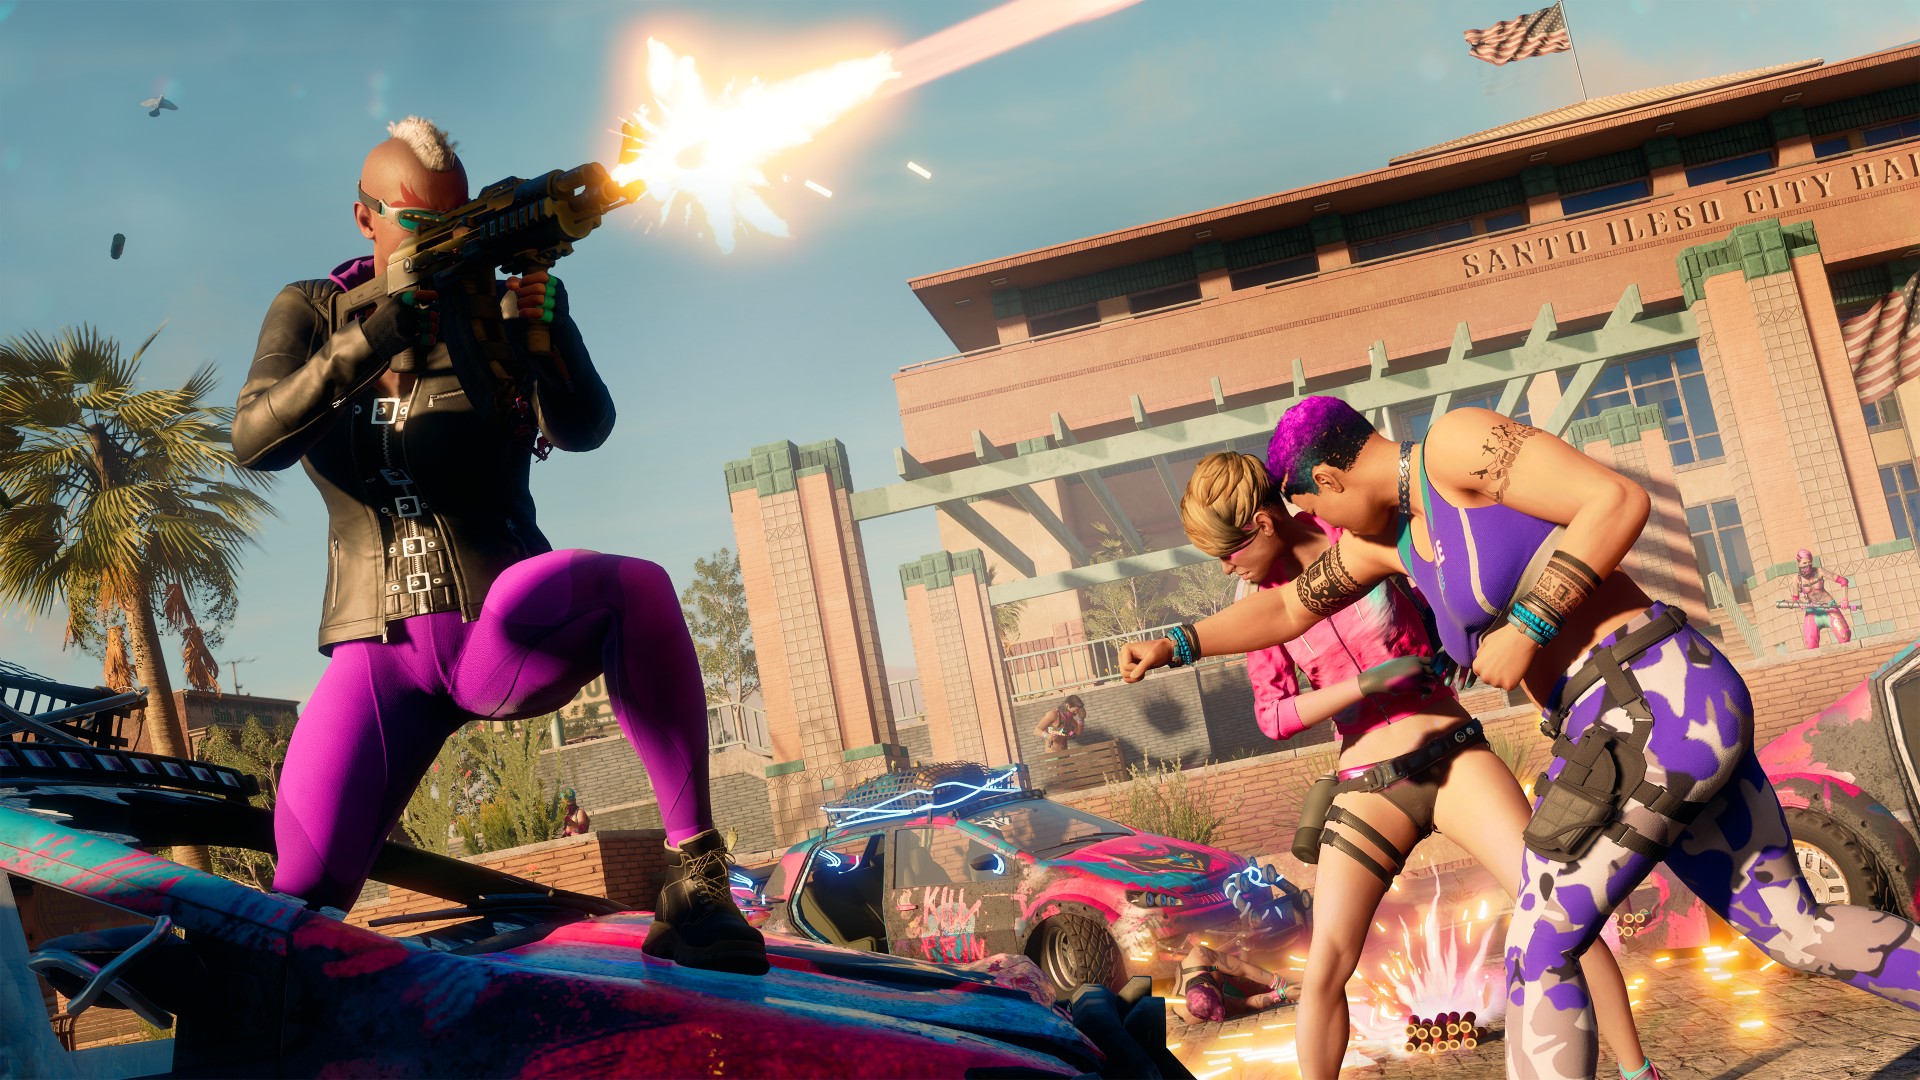 Saints Row is as bold, brash, and brazen as anything that’s come before it